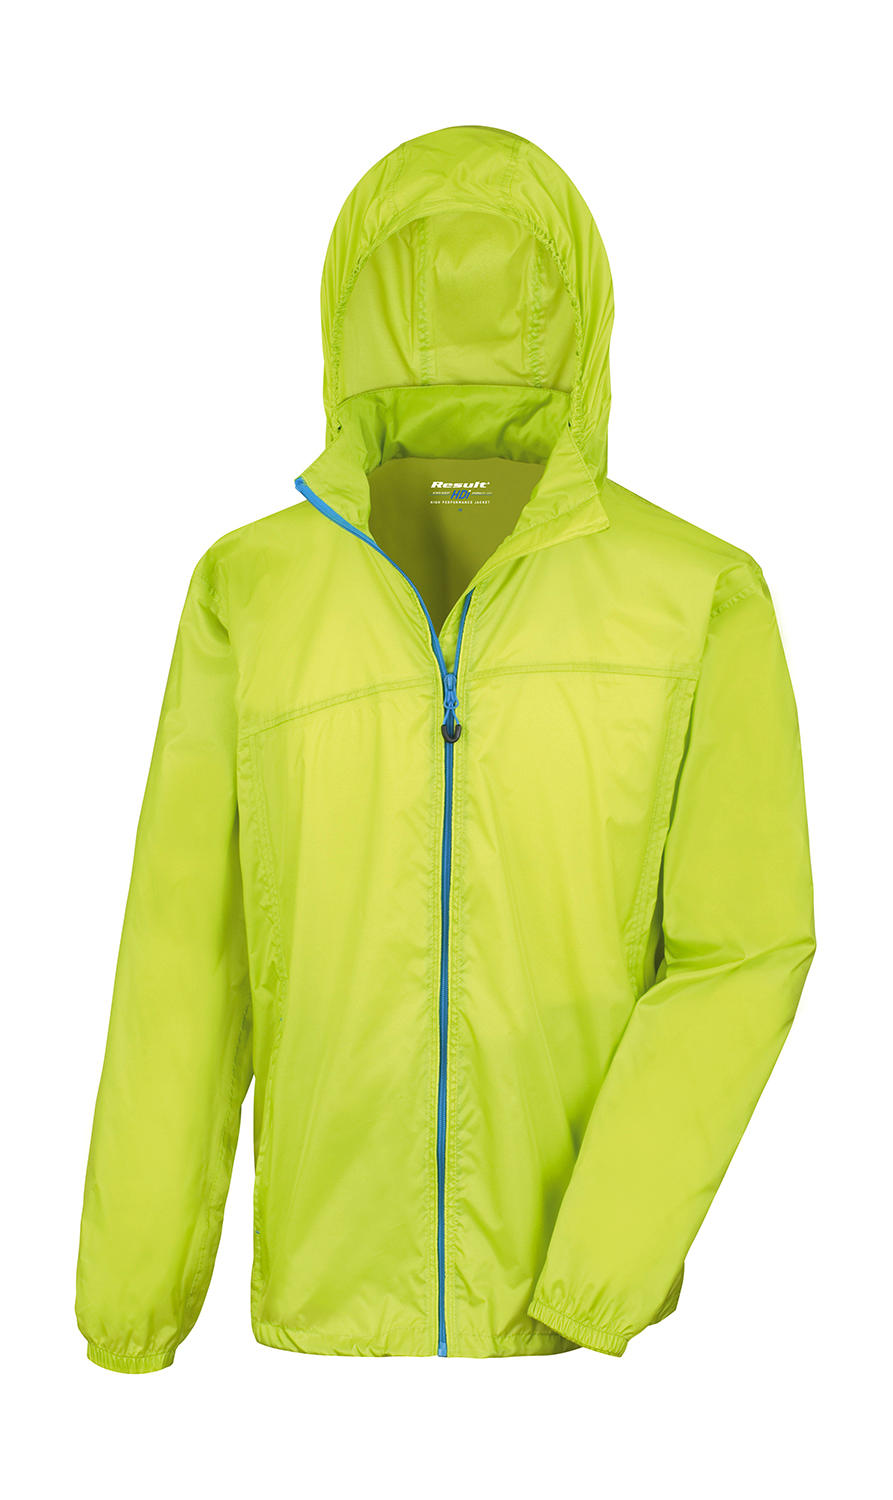  HDI Quest Lightweight Stowable Jacket in Farbe Lime/Royal